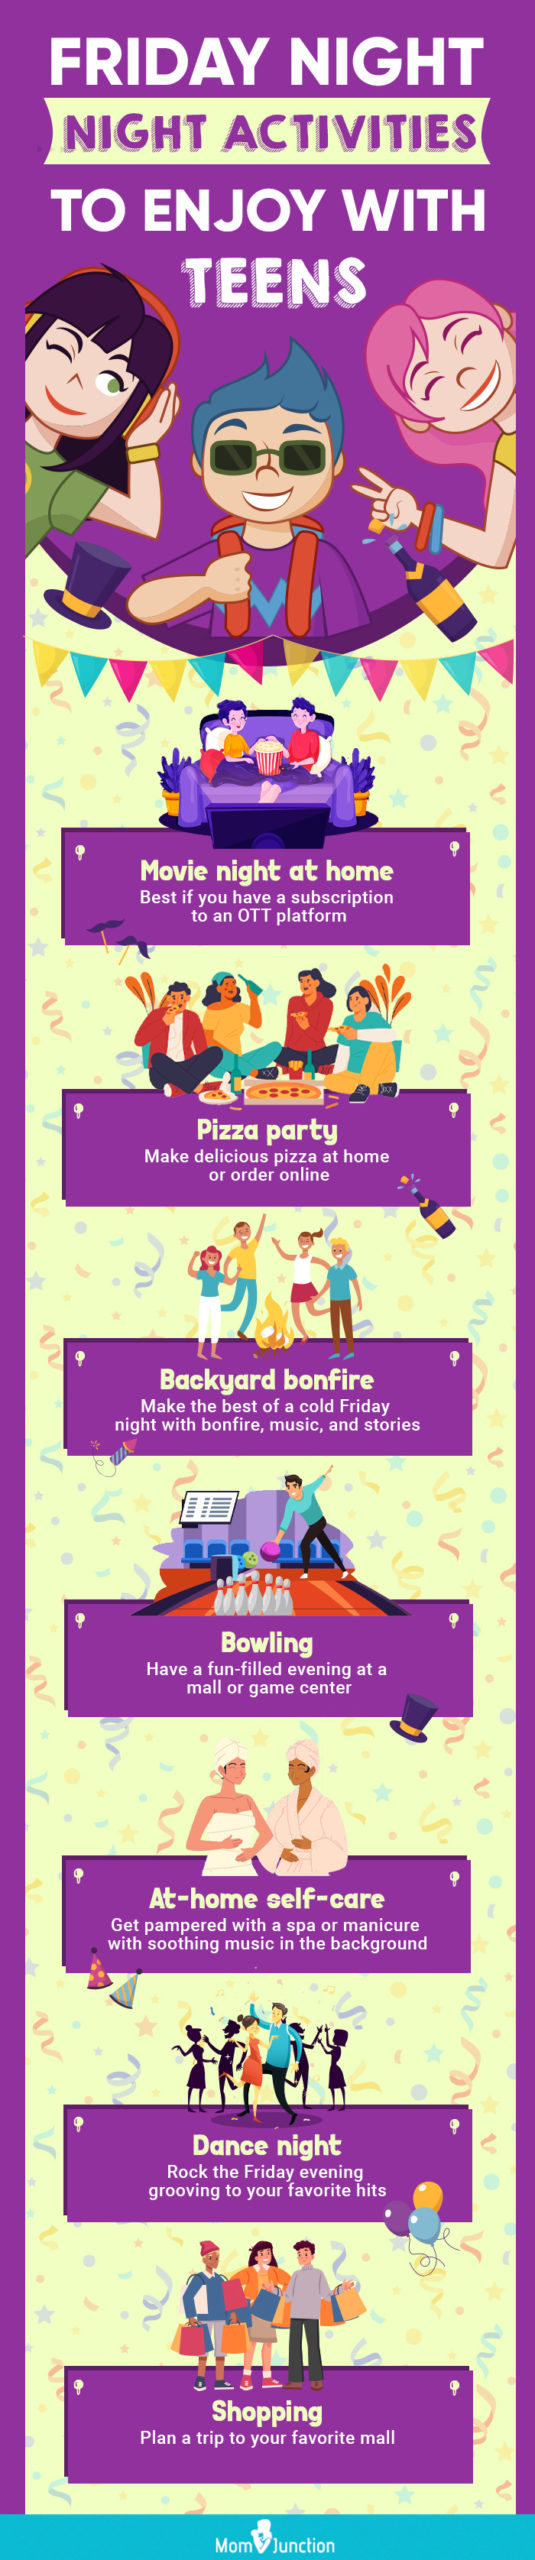 fun friday night activities to enjoy with teens (infographic)